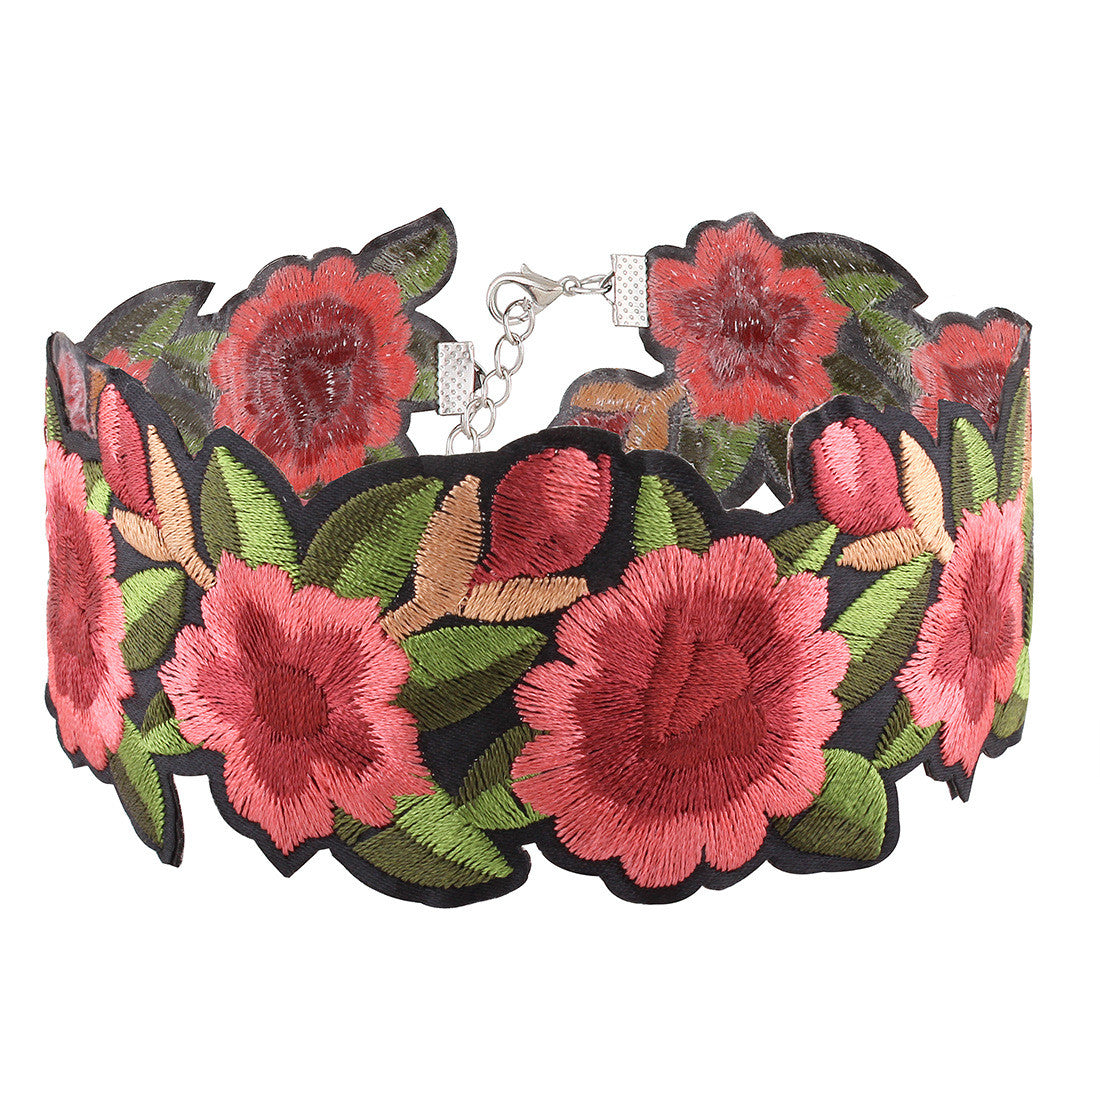 Rose Flower Sexy Boho Handmade Embroidered Floral Statement Choker Necklace